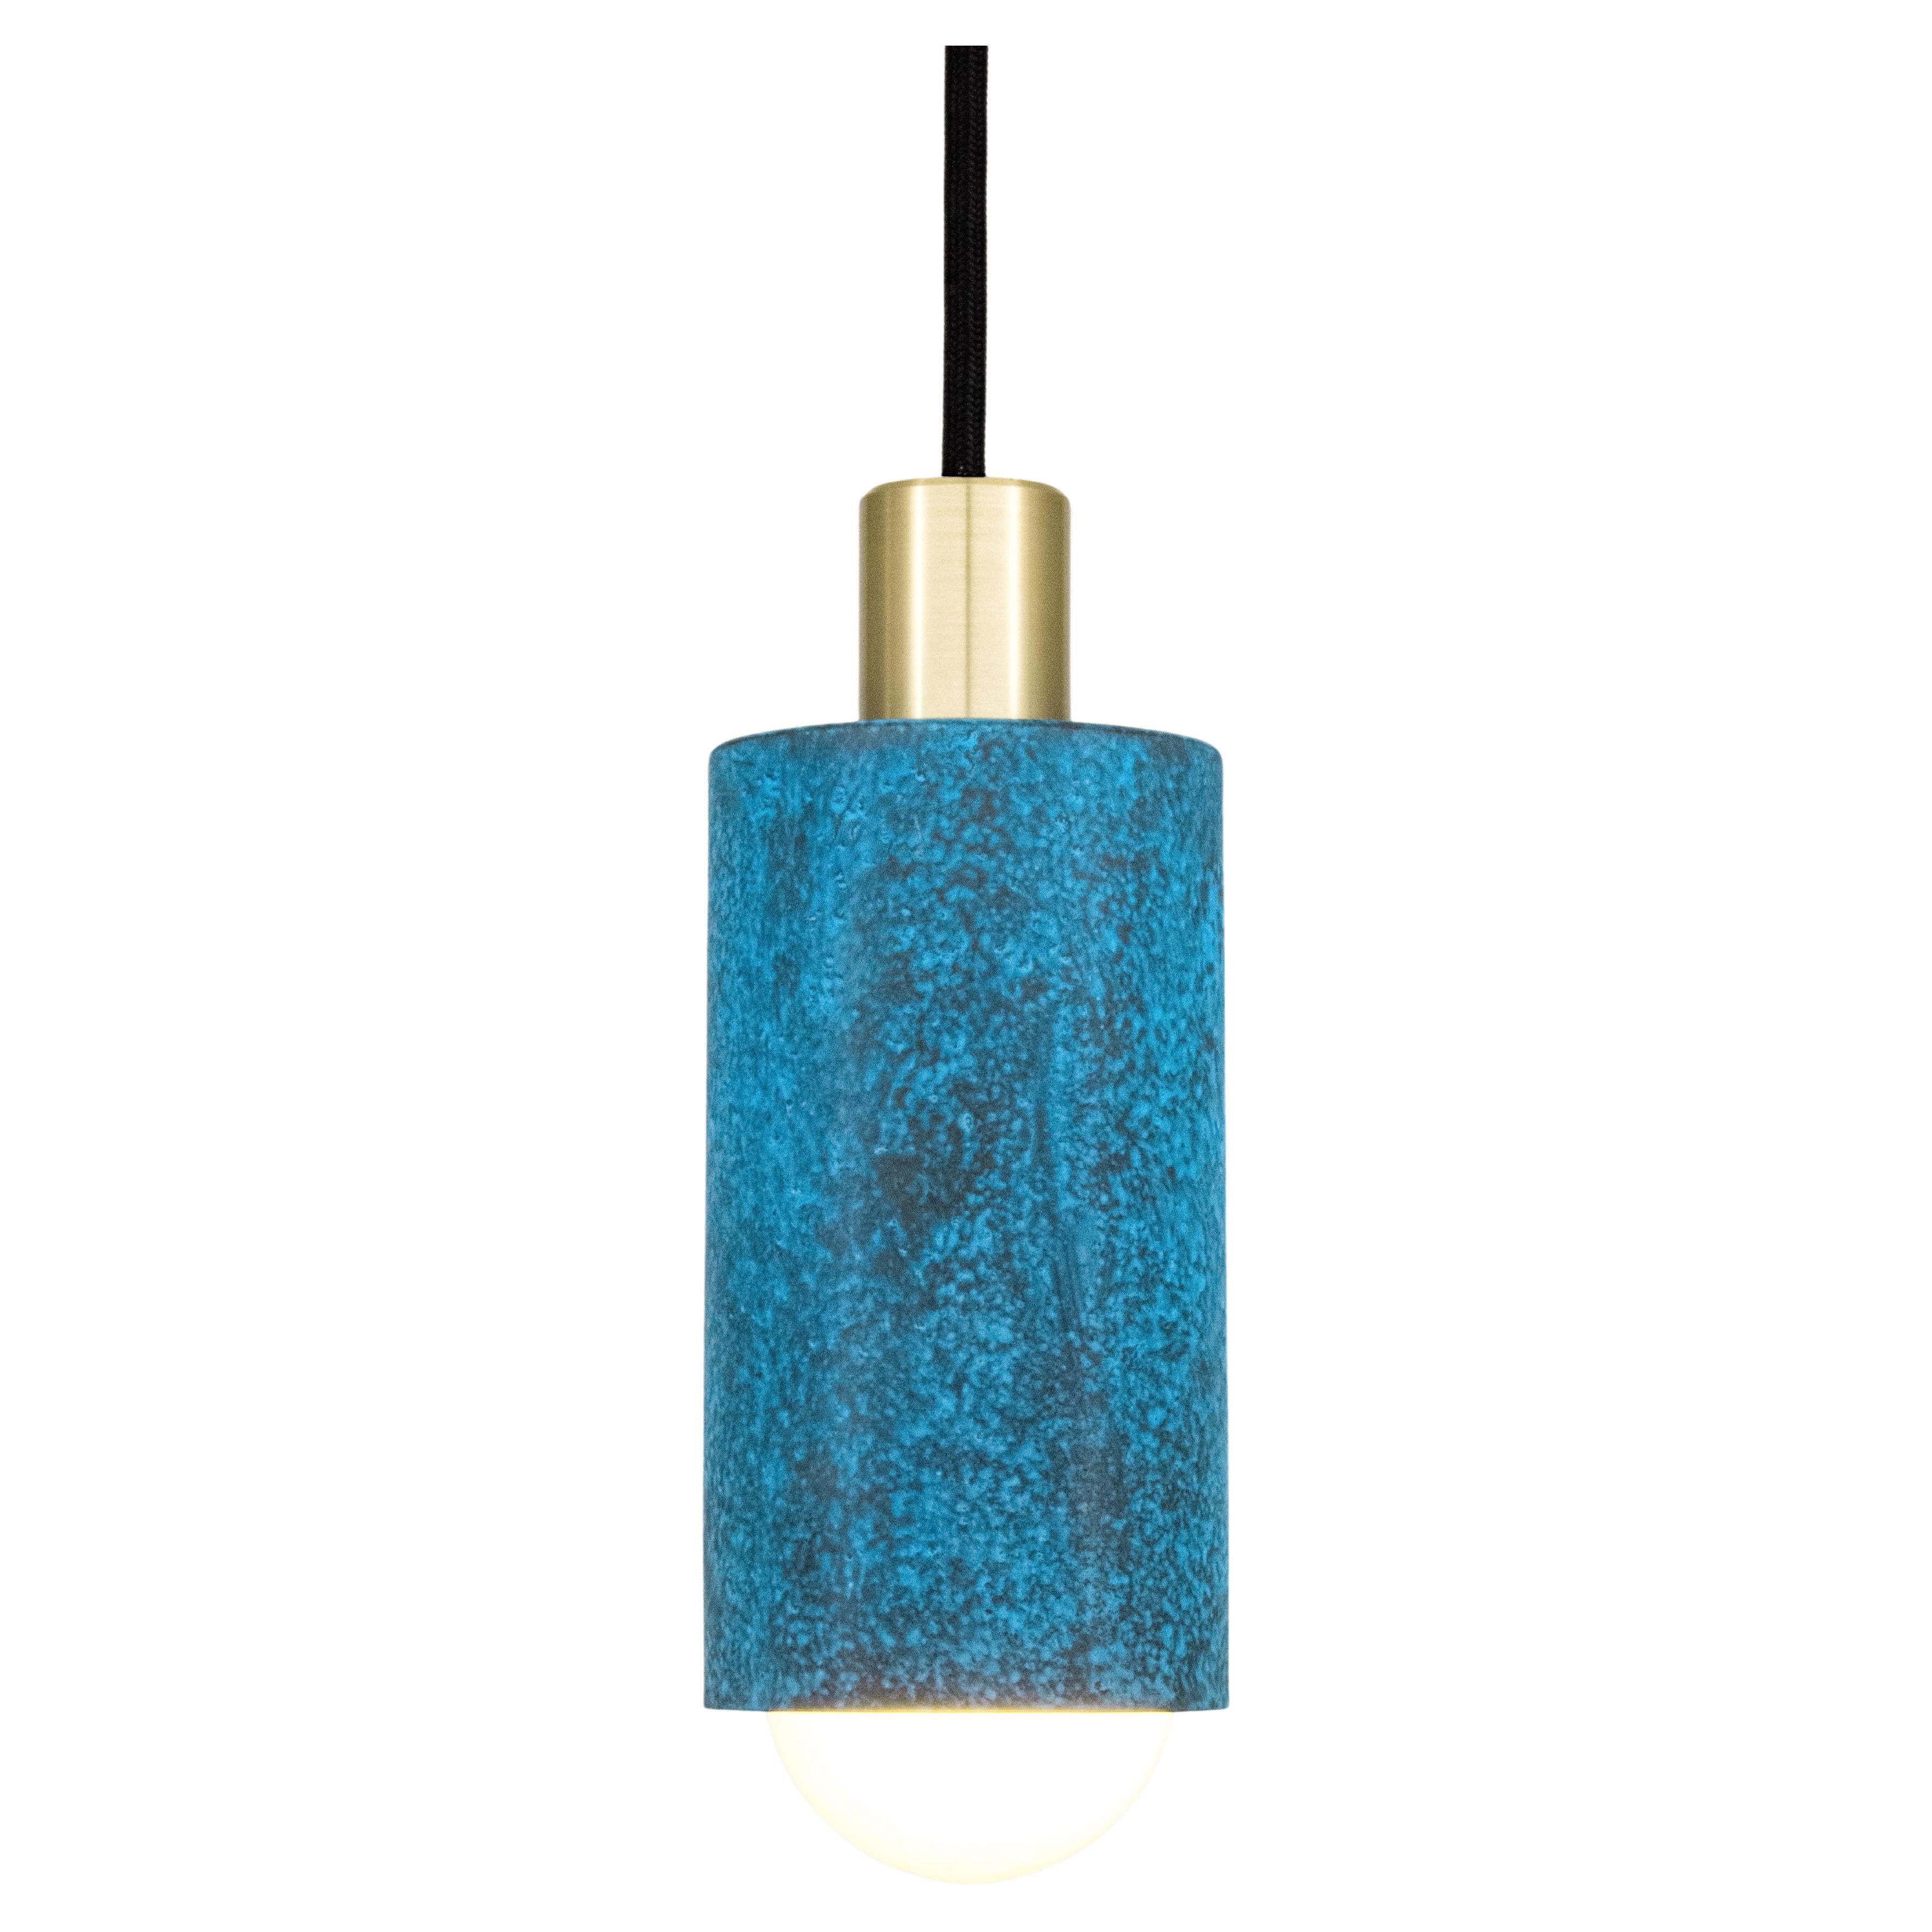 Produced by Trella’s skilled team of artisans, the Louise pendant light makes for perfect use over bars, nightstands, kitchen islands, or any space in need of a warm inviting glow. Featuring a cylindrical brass shade patinated in Trella’s signature